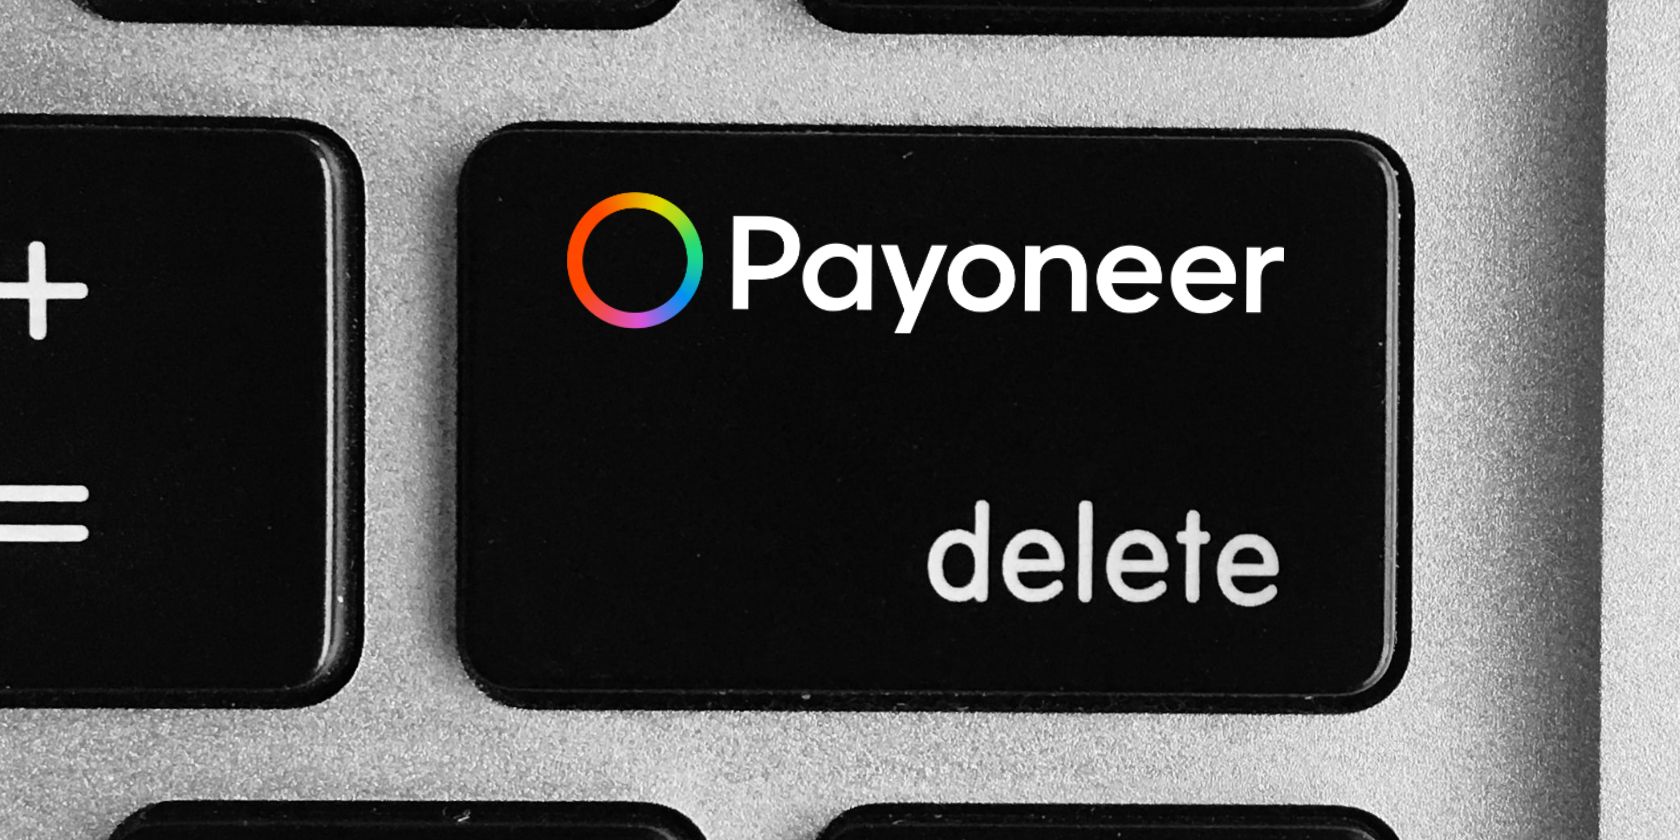 The Payoneer logo above the delete key.